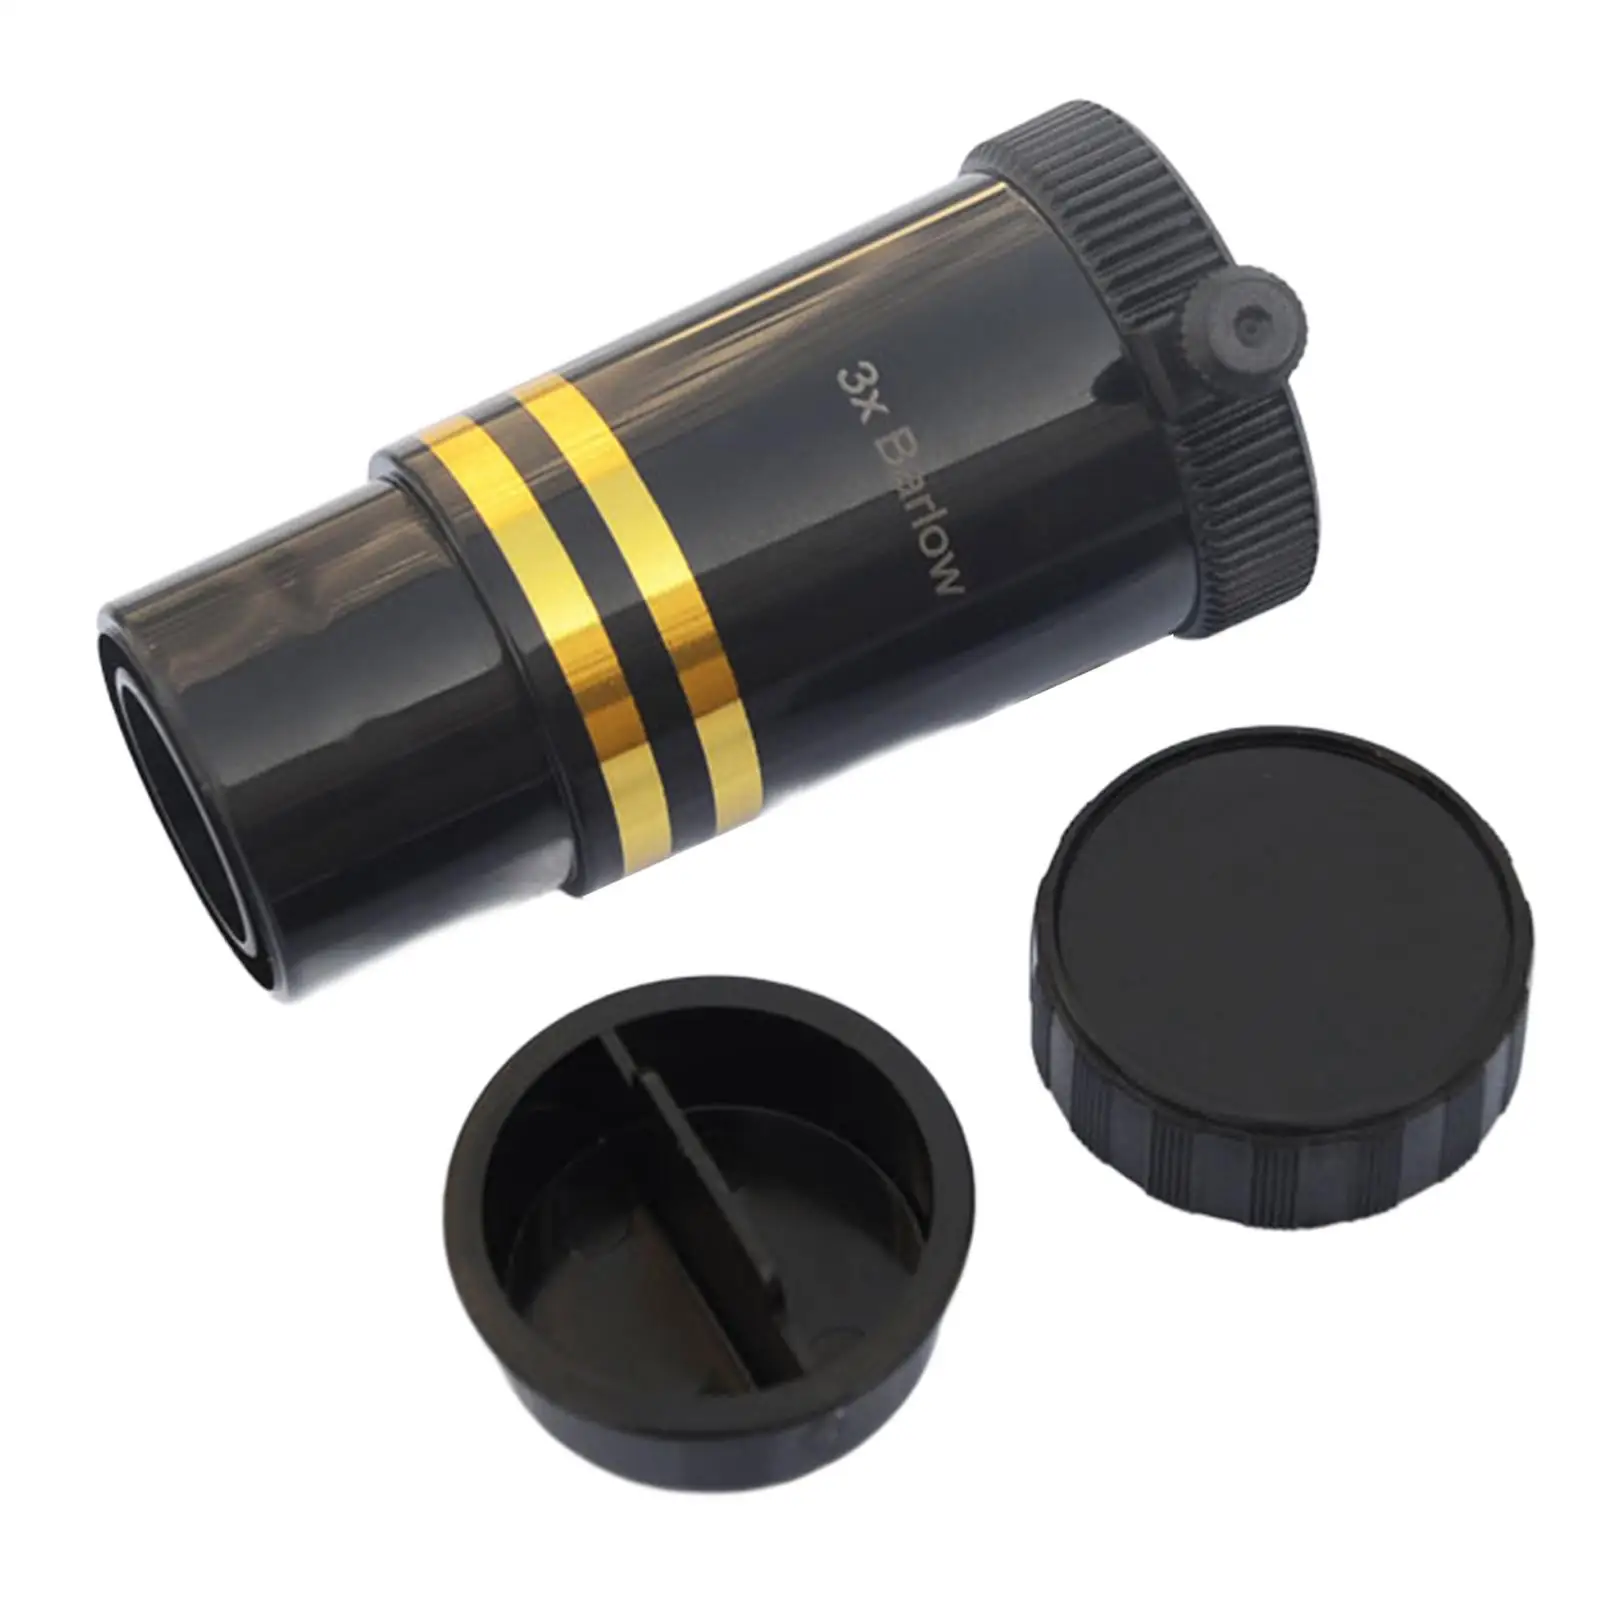 3x Barlow Lens Magnification for Telescope Eyepiece 1.25inch Telescope Accessory for Astronomy Astronomical Visual Photography